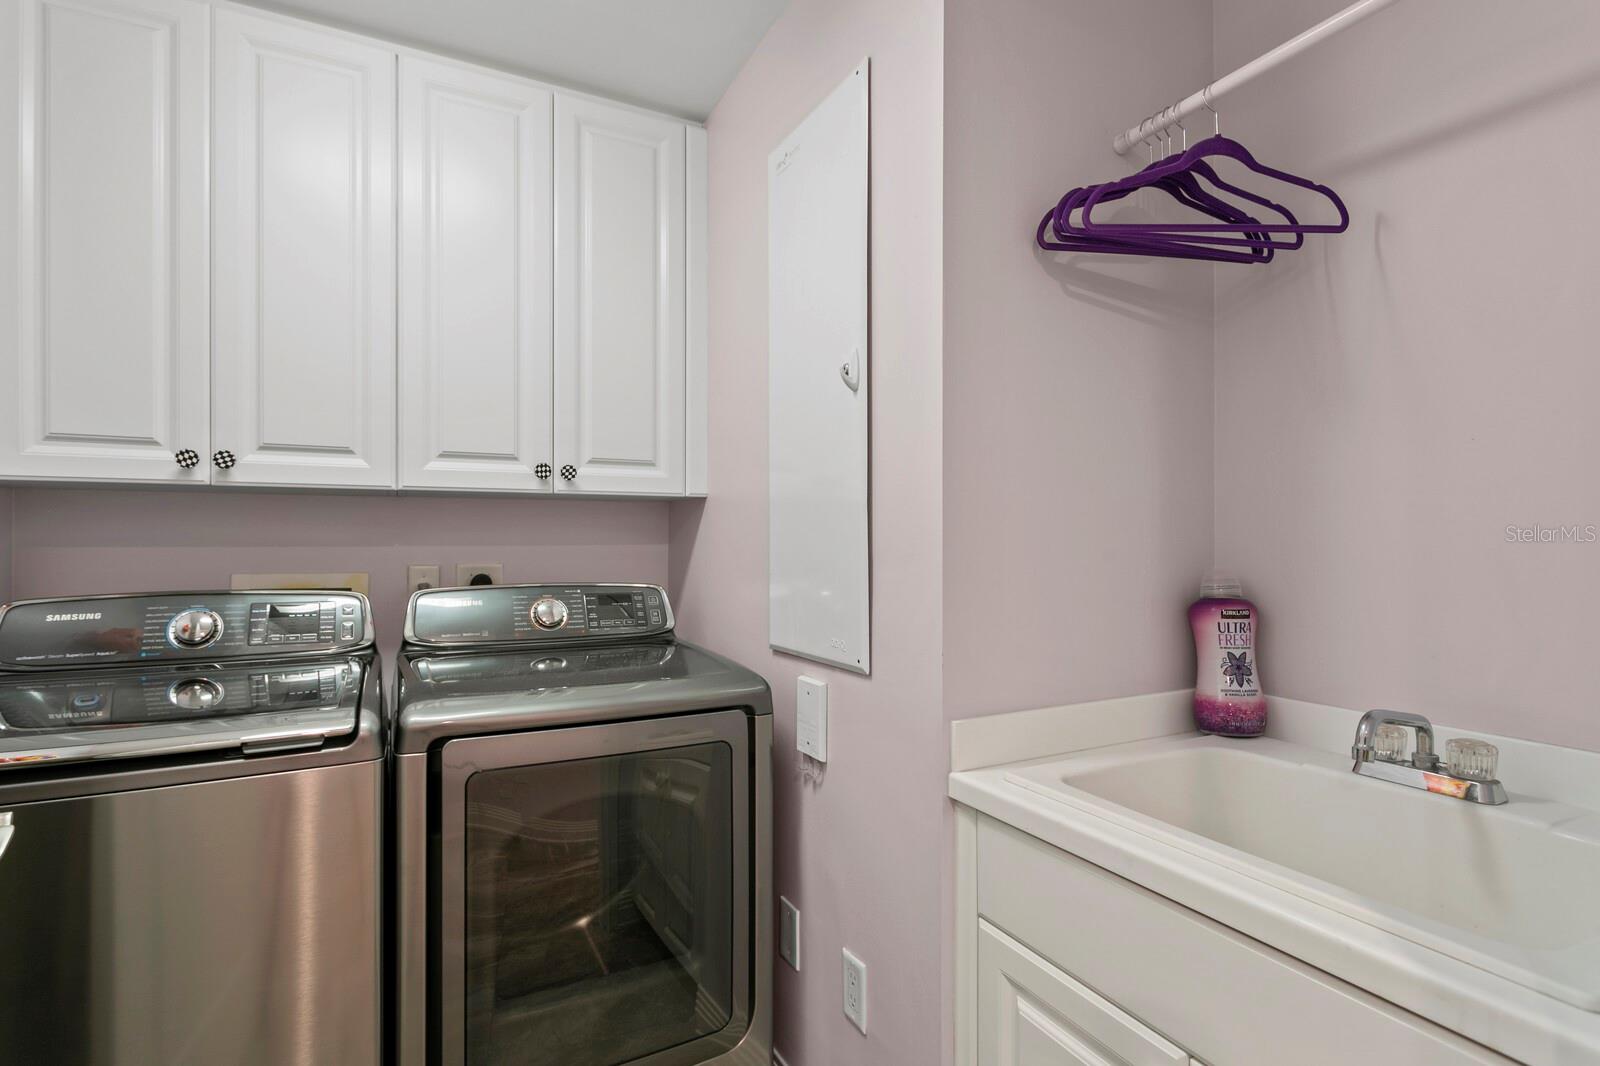 Laundry Room with Samsung washer and dryer.